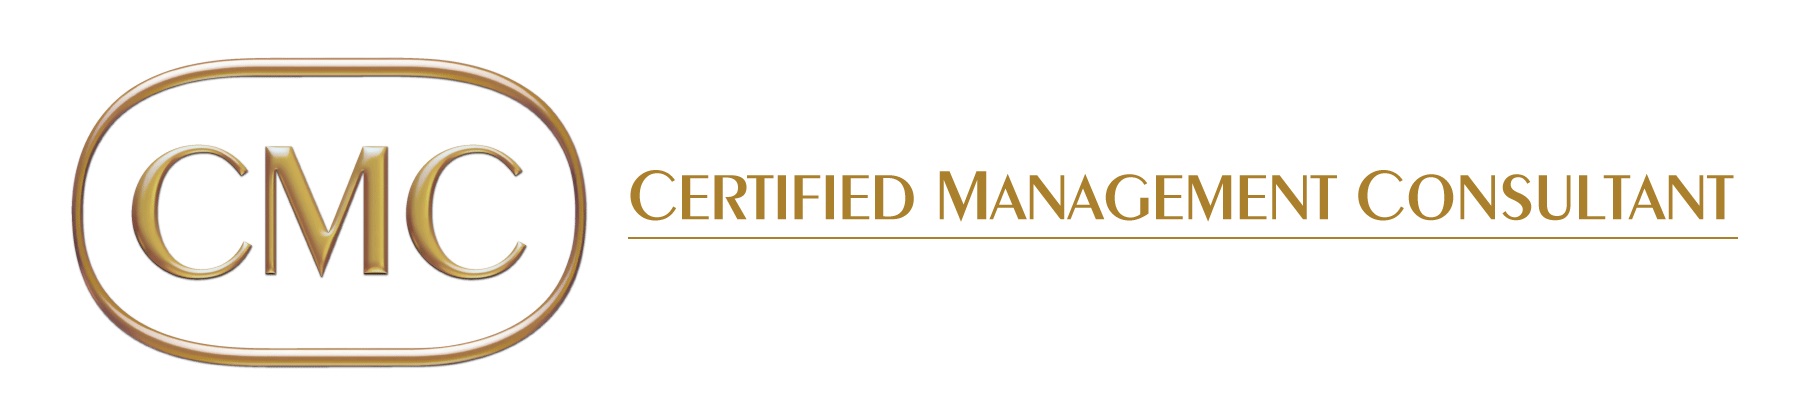 Certified Management Consultant